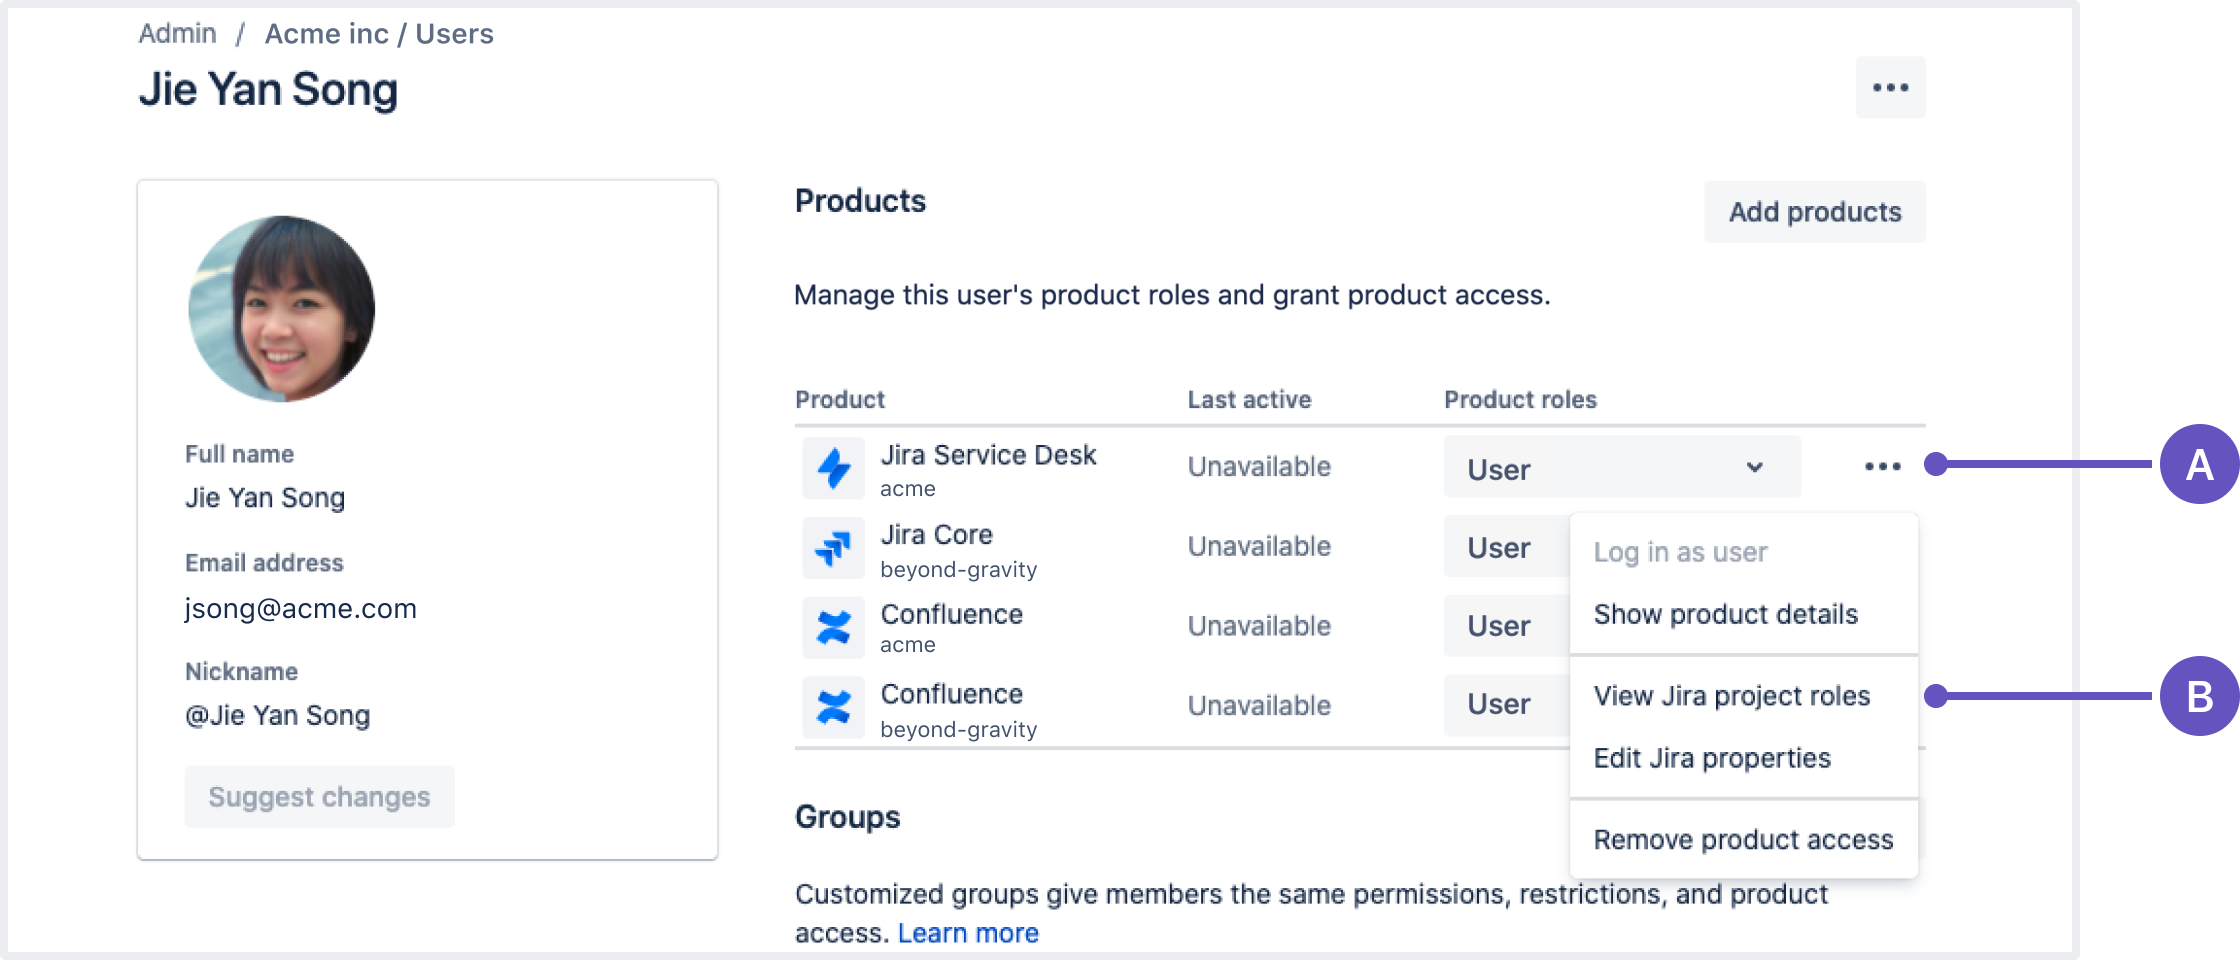 User profile with 3-dot menu showing a View Jira project roles button